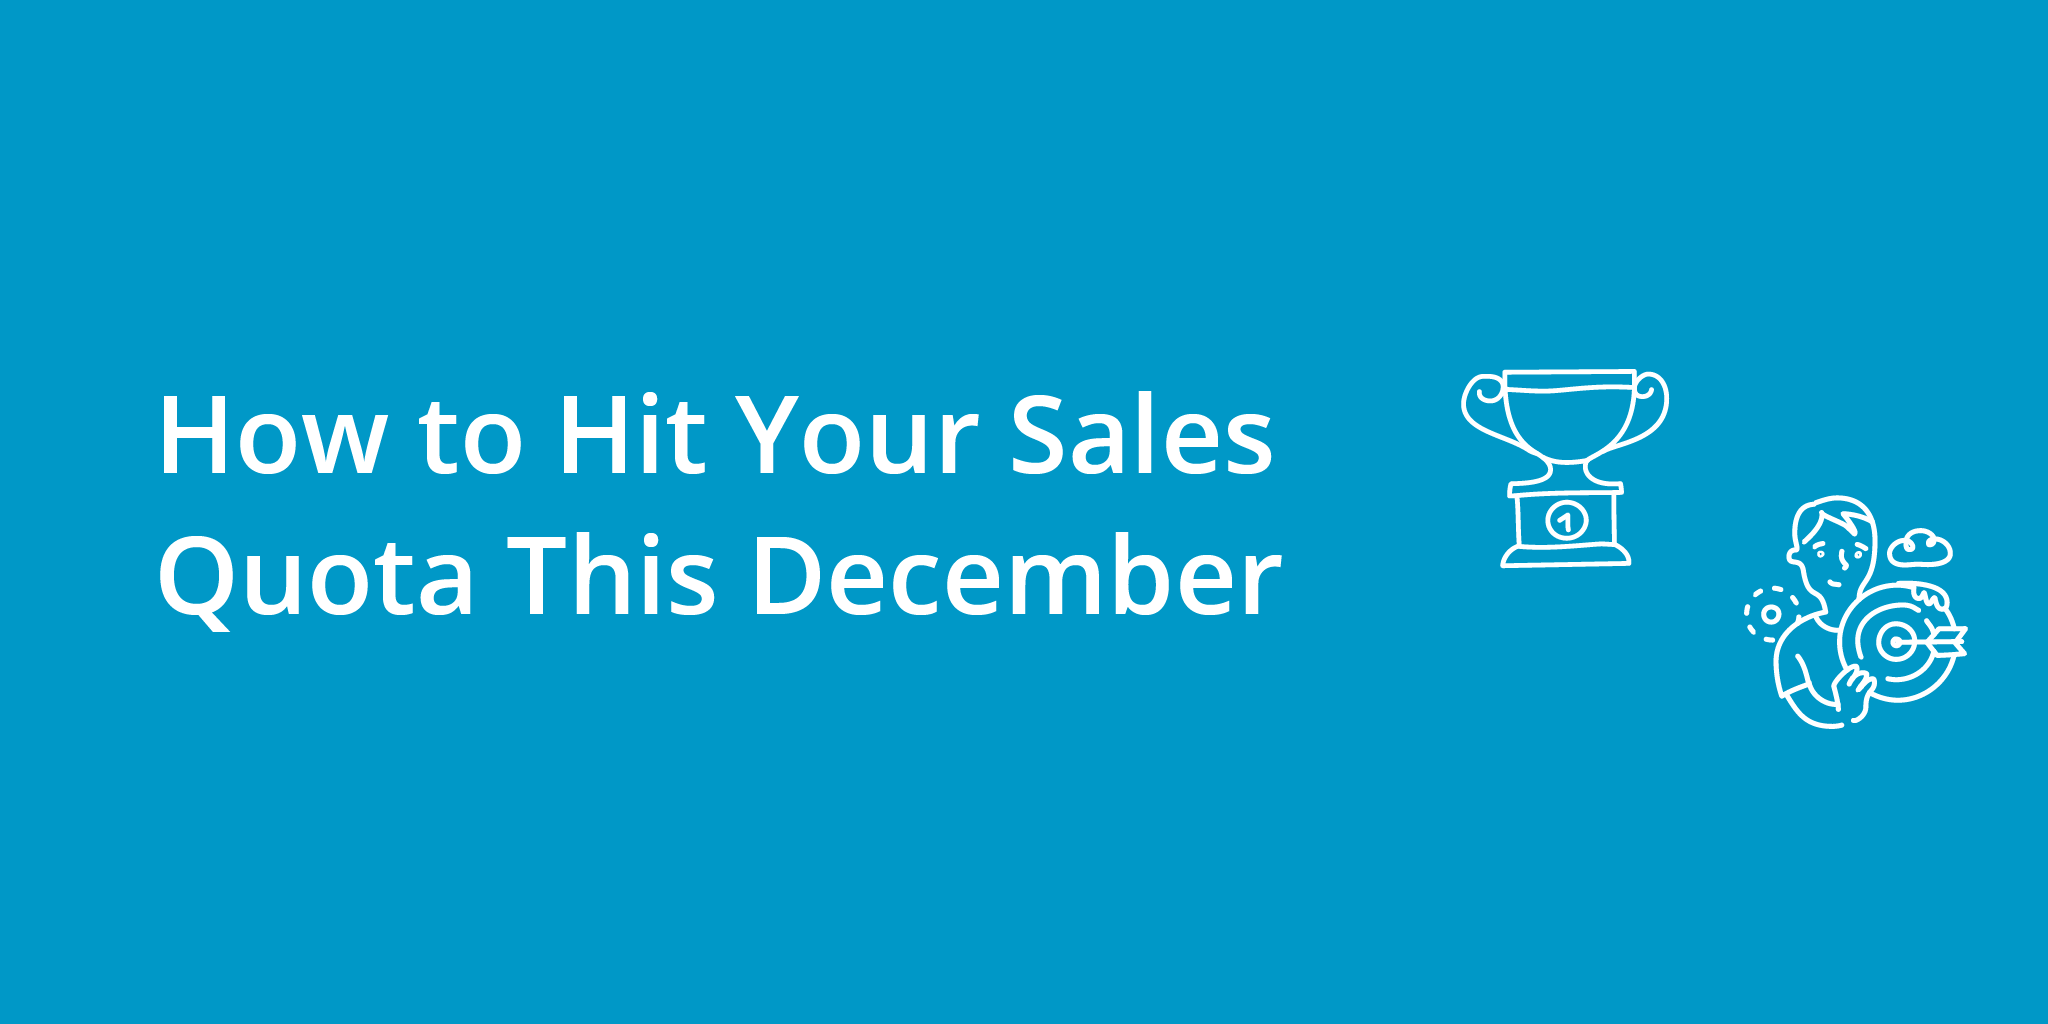 How to Hit Your Sales Quota This December | Telephones for business